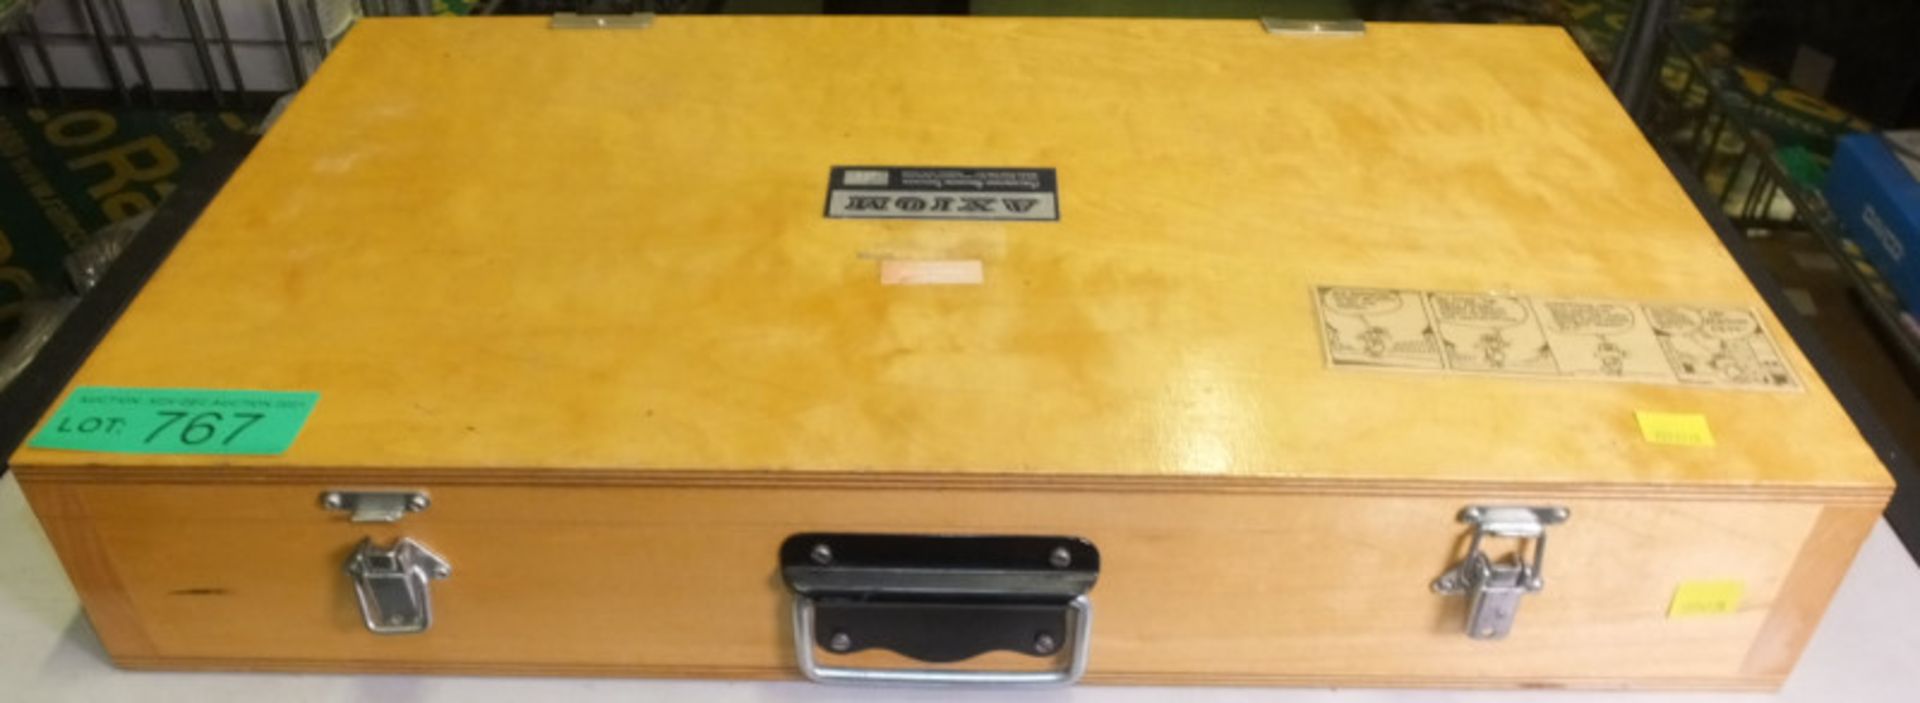 Axiom Precision Measuring Tool In a Wooden Case - Image 3 of 3